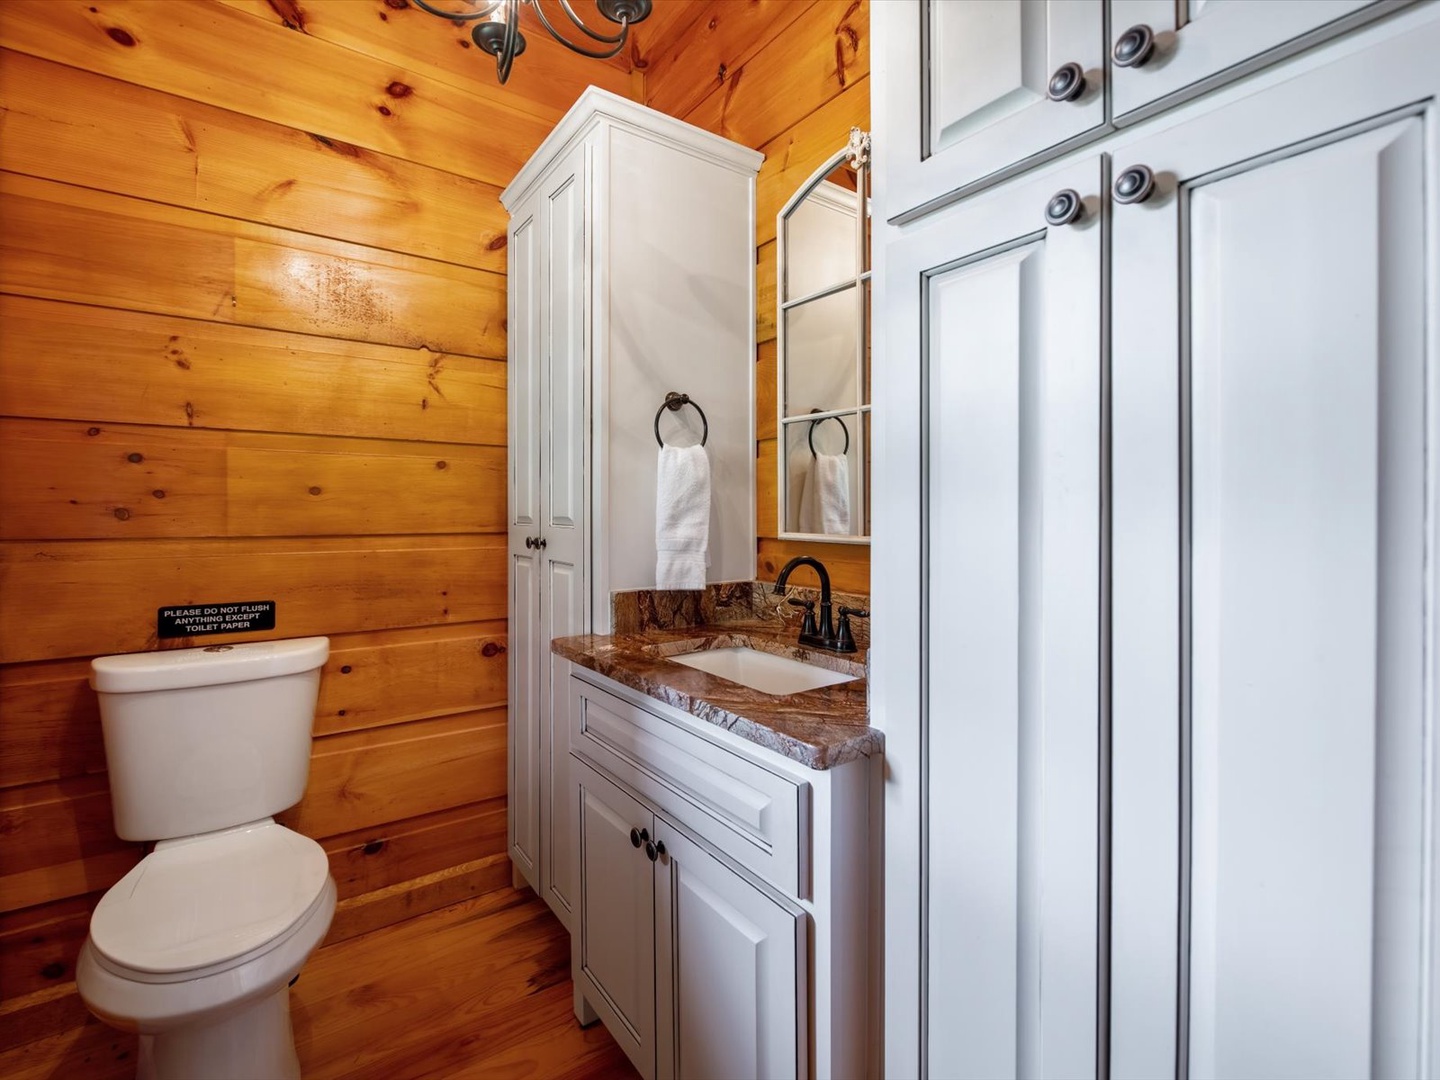 Take Me to the River -Entry Level Shared Bathroom